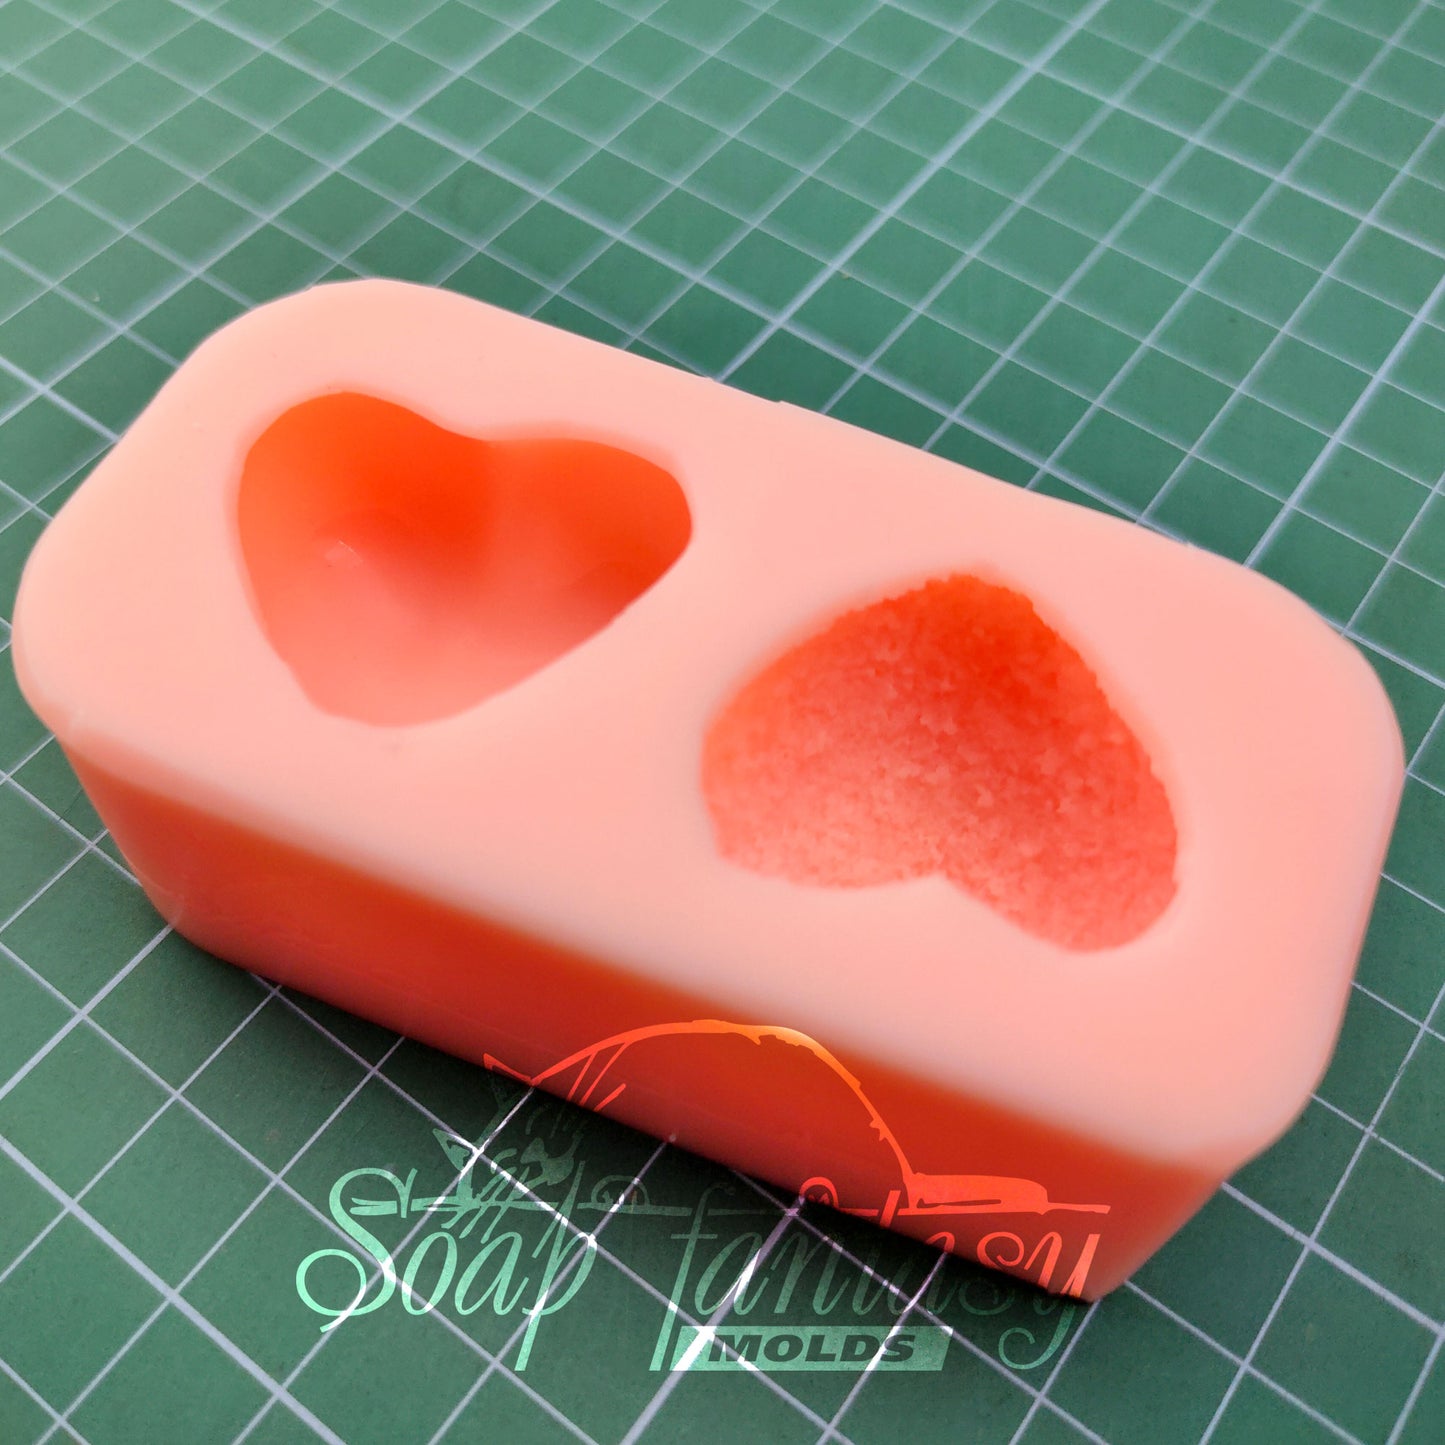 Knitted mittens silicone mold for soap making